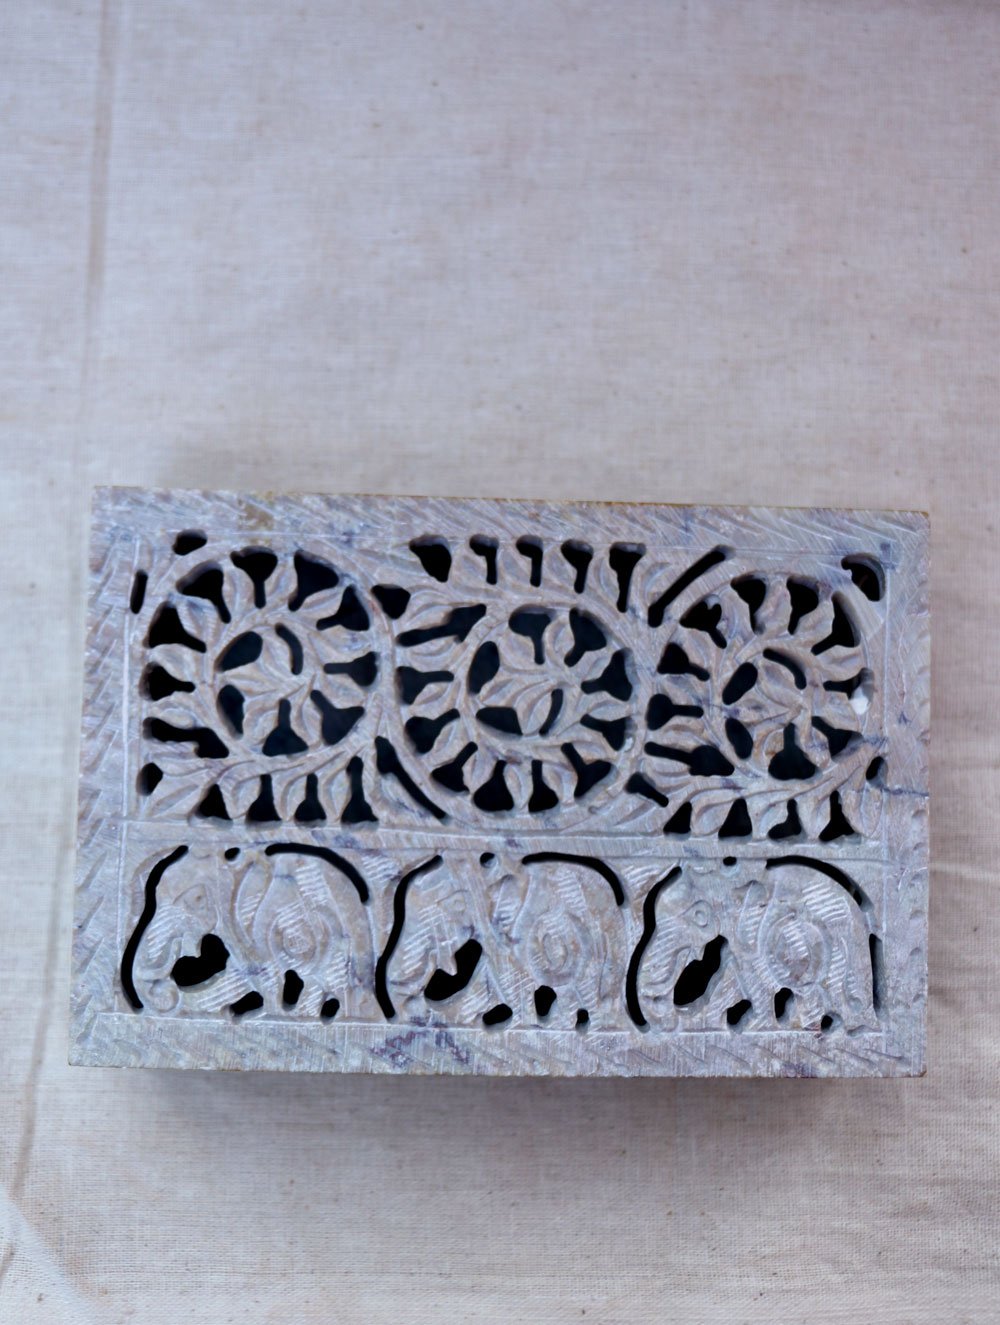 Load image into Gallery viewer, Carved Filigree Stone Rectangle Box